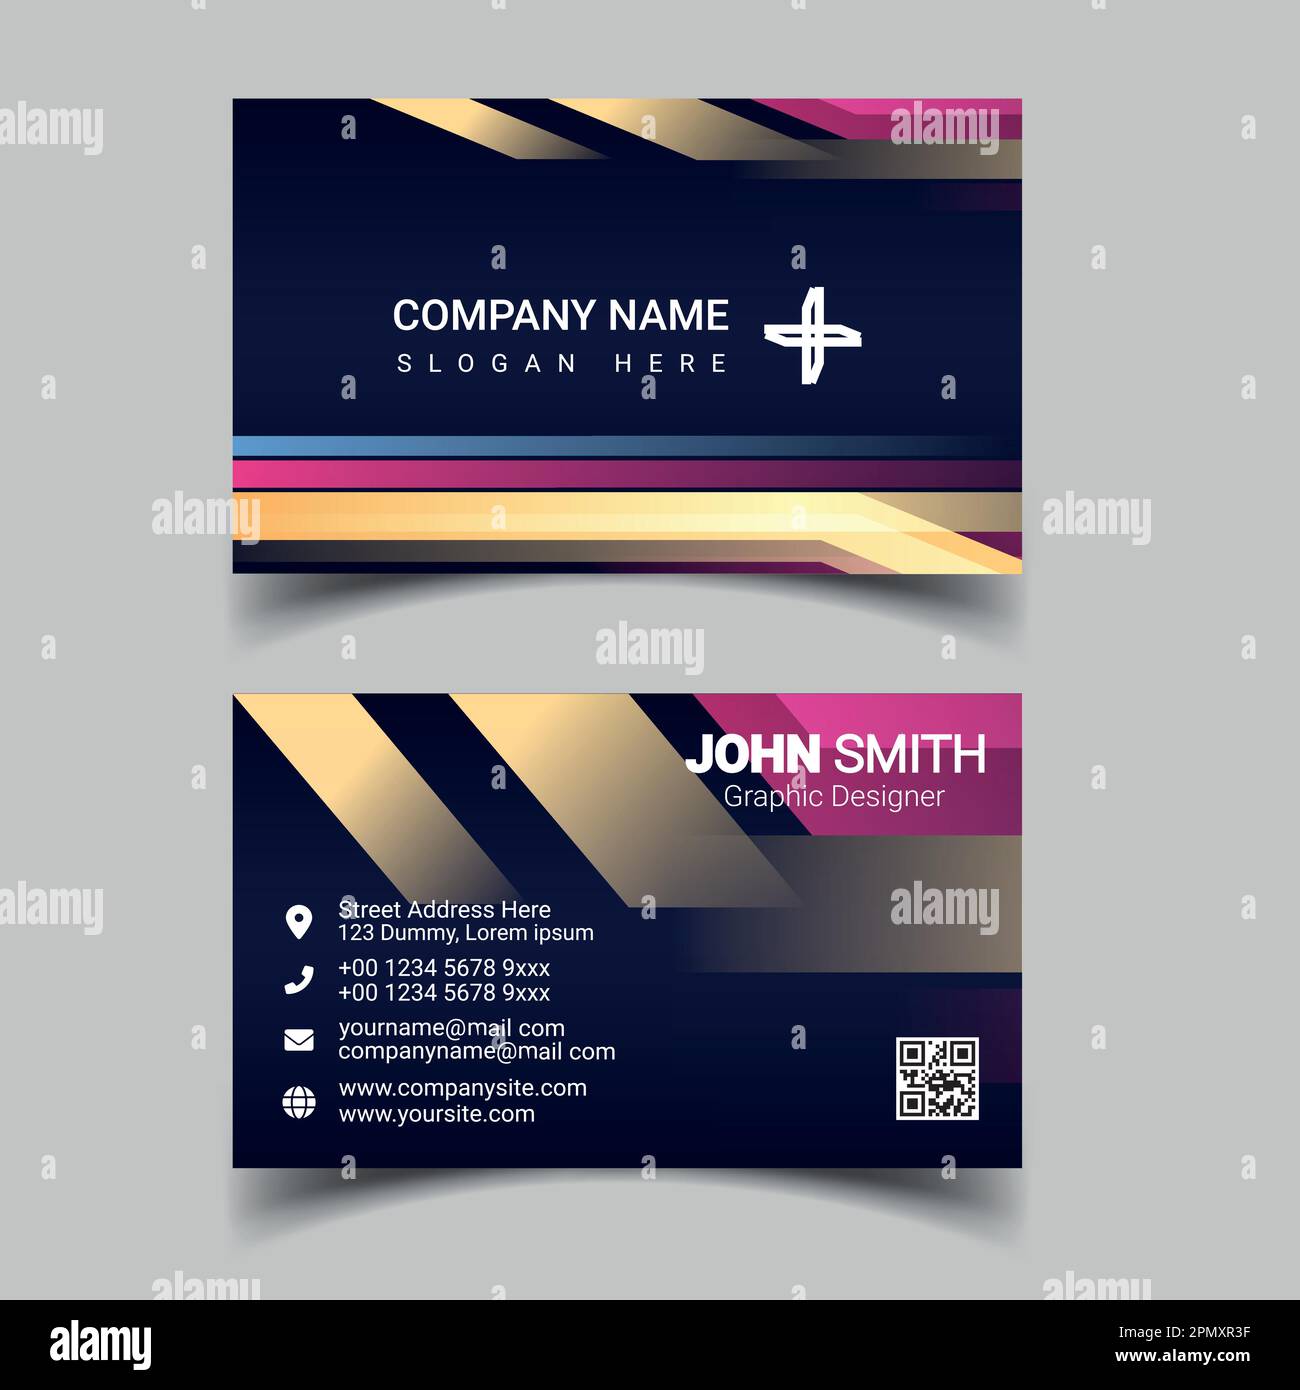 Professional business card design template for company or business. Two color simple but professional design. Compatible for business and personal use Stock Vector